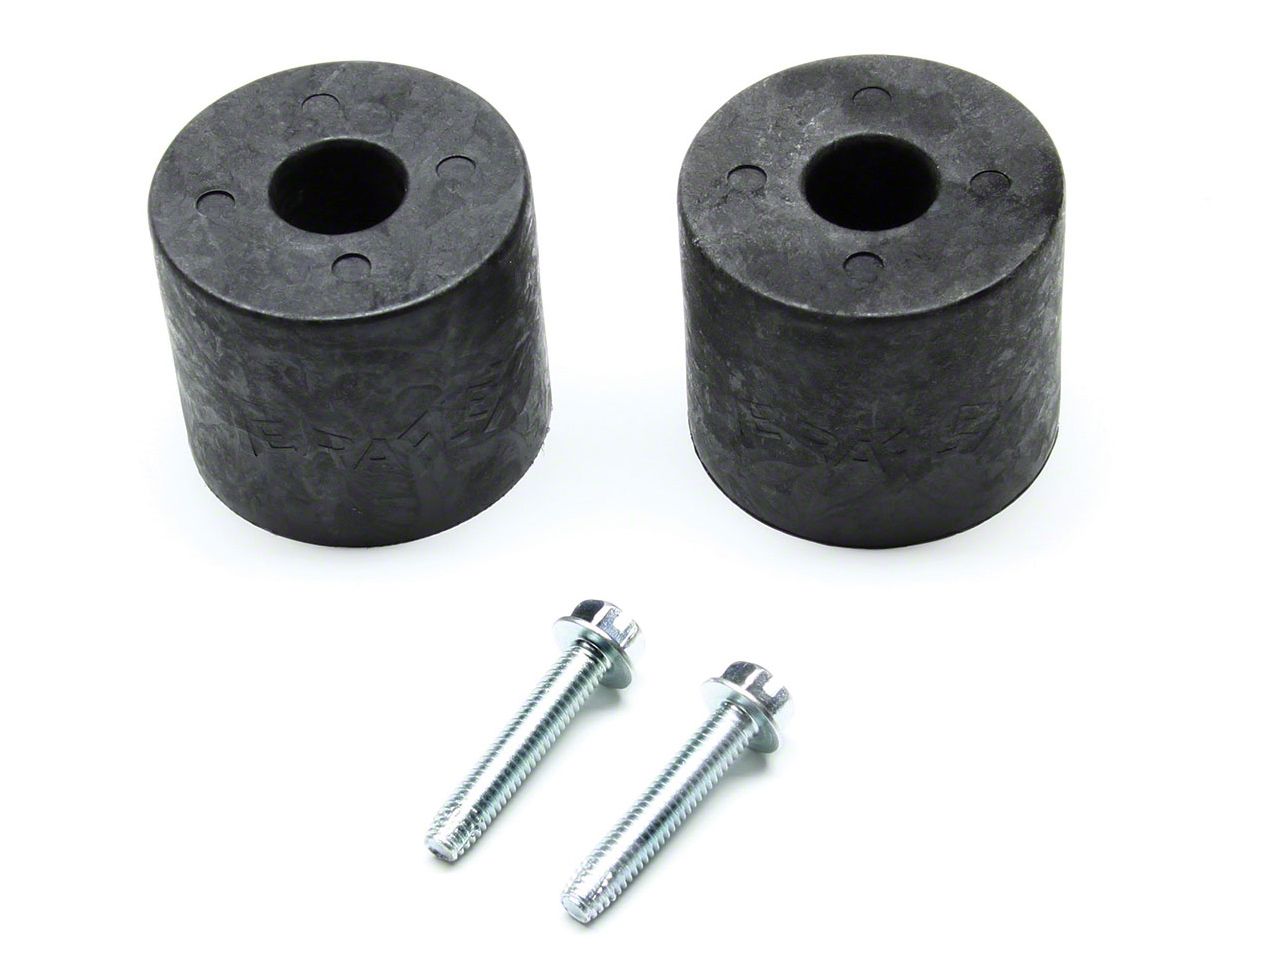 TeraFlex 1958252 JK Rear Bump stop Kit 1 Pack For 2.5 Lift with Extended Microcellular Foam and Axle Pad 